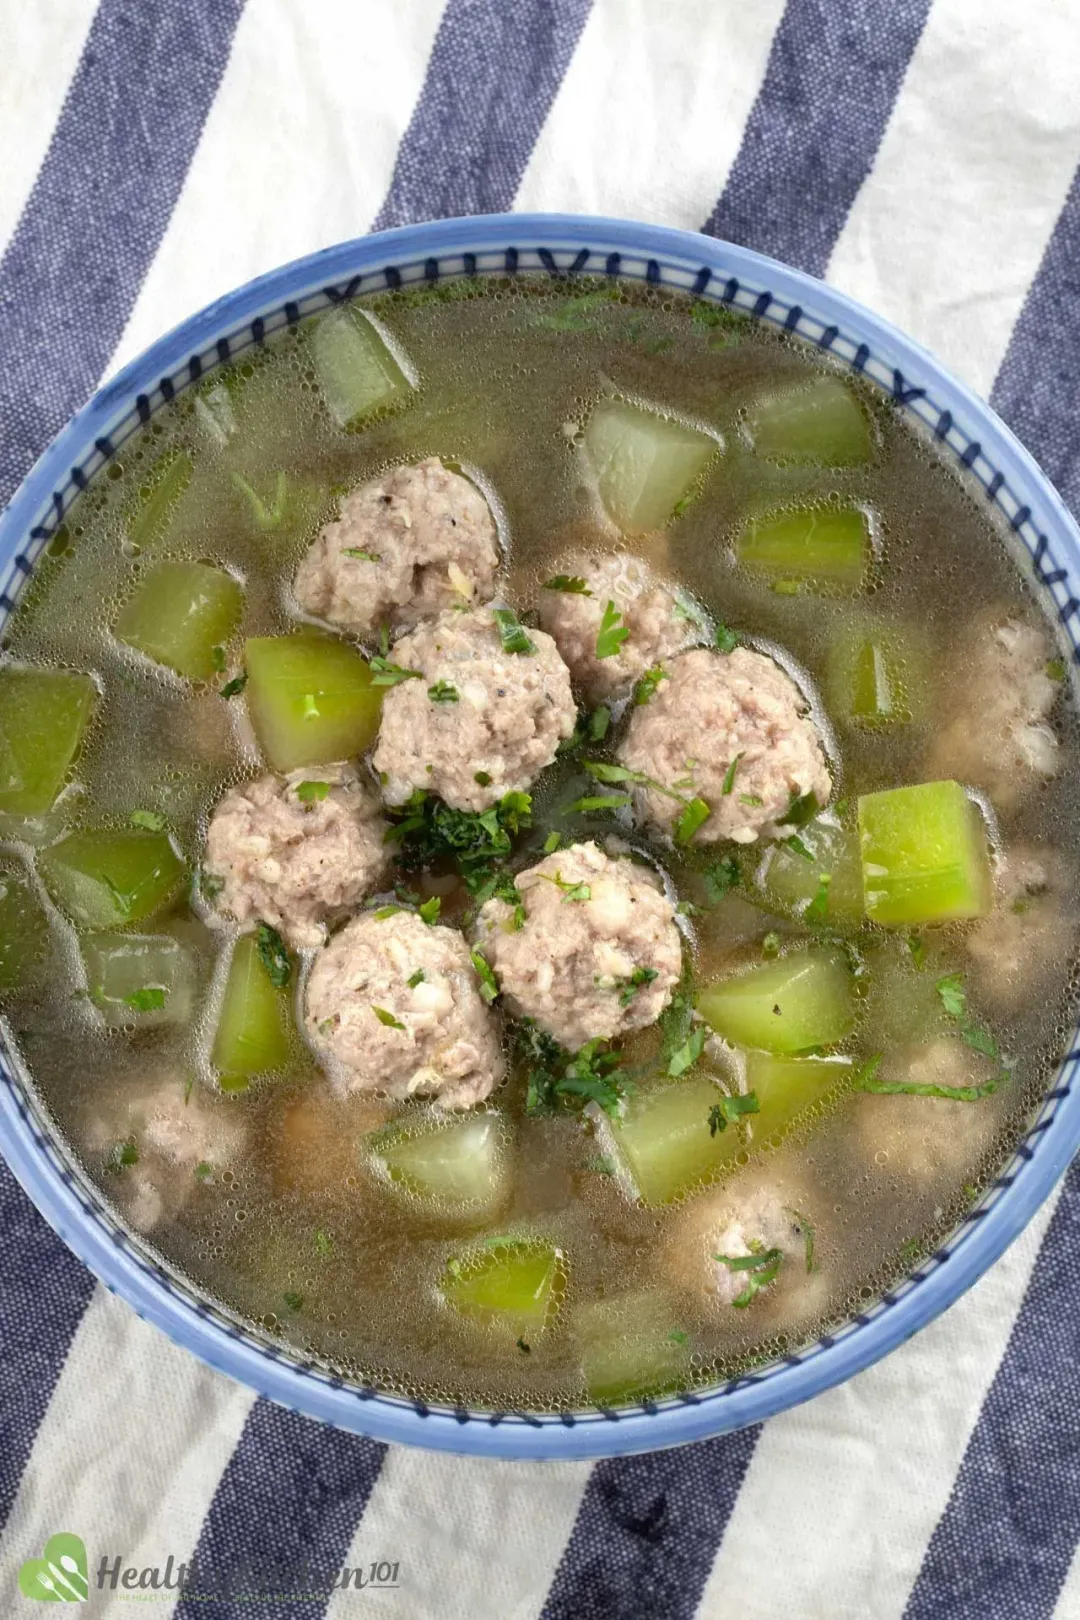 Tips for Making Winter Melon Meatball Soup Recipe